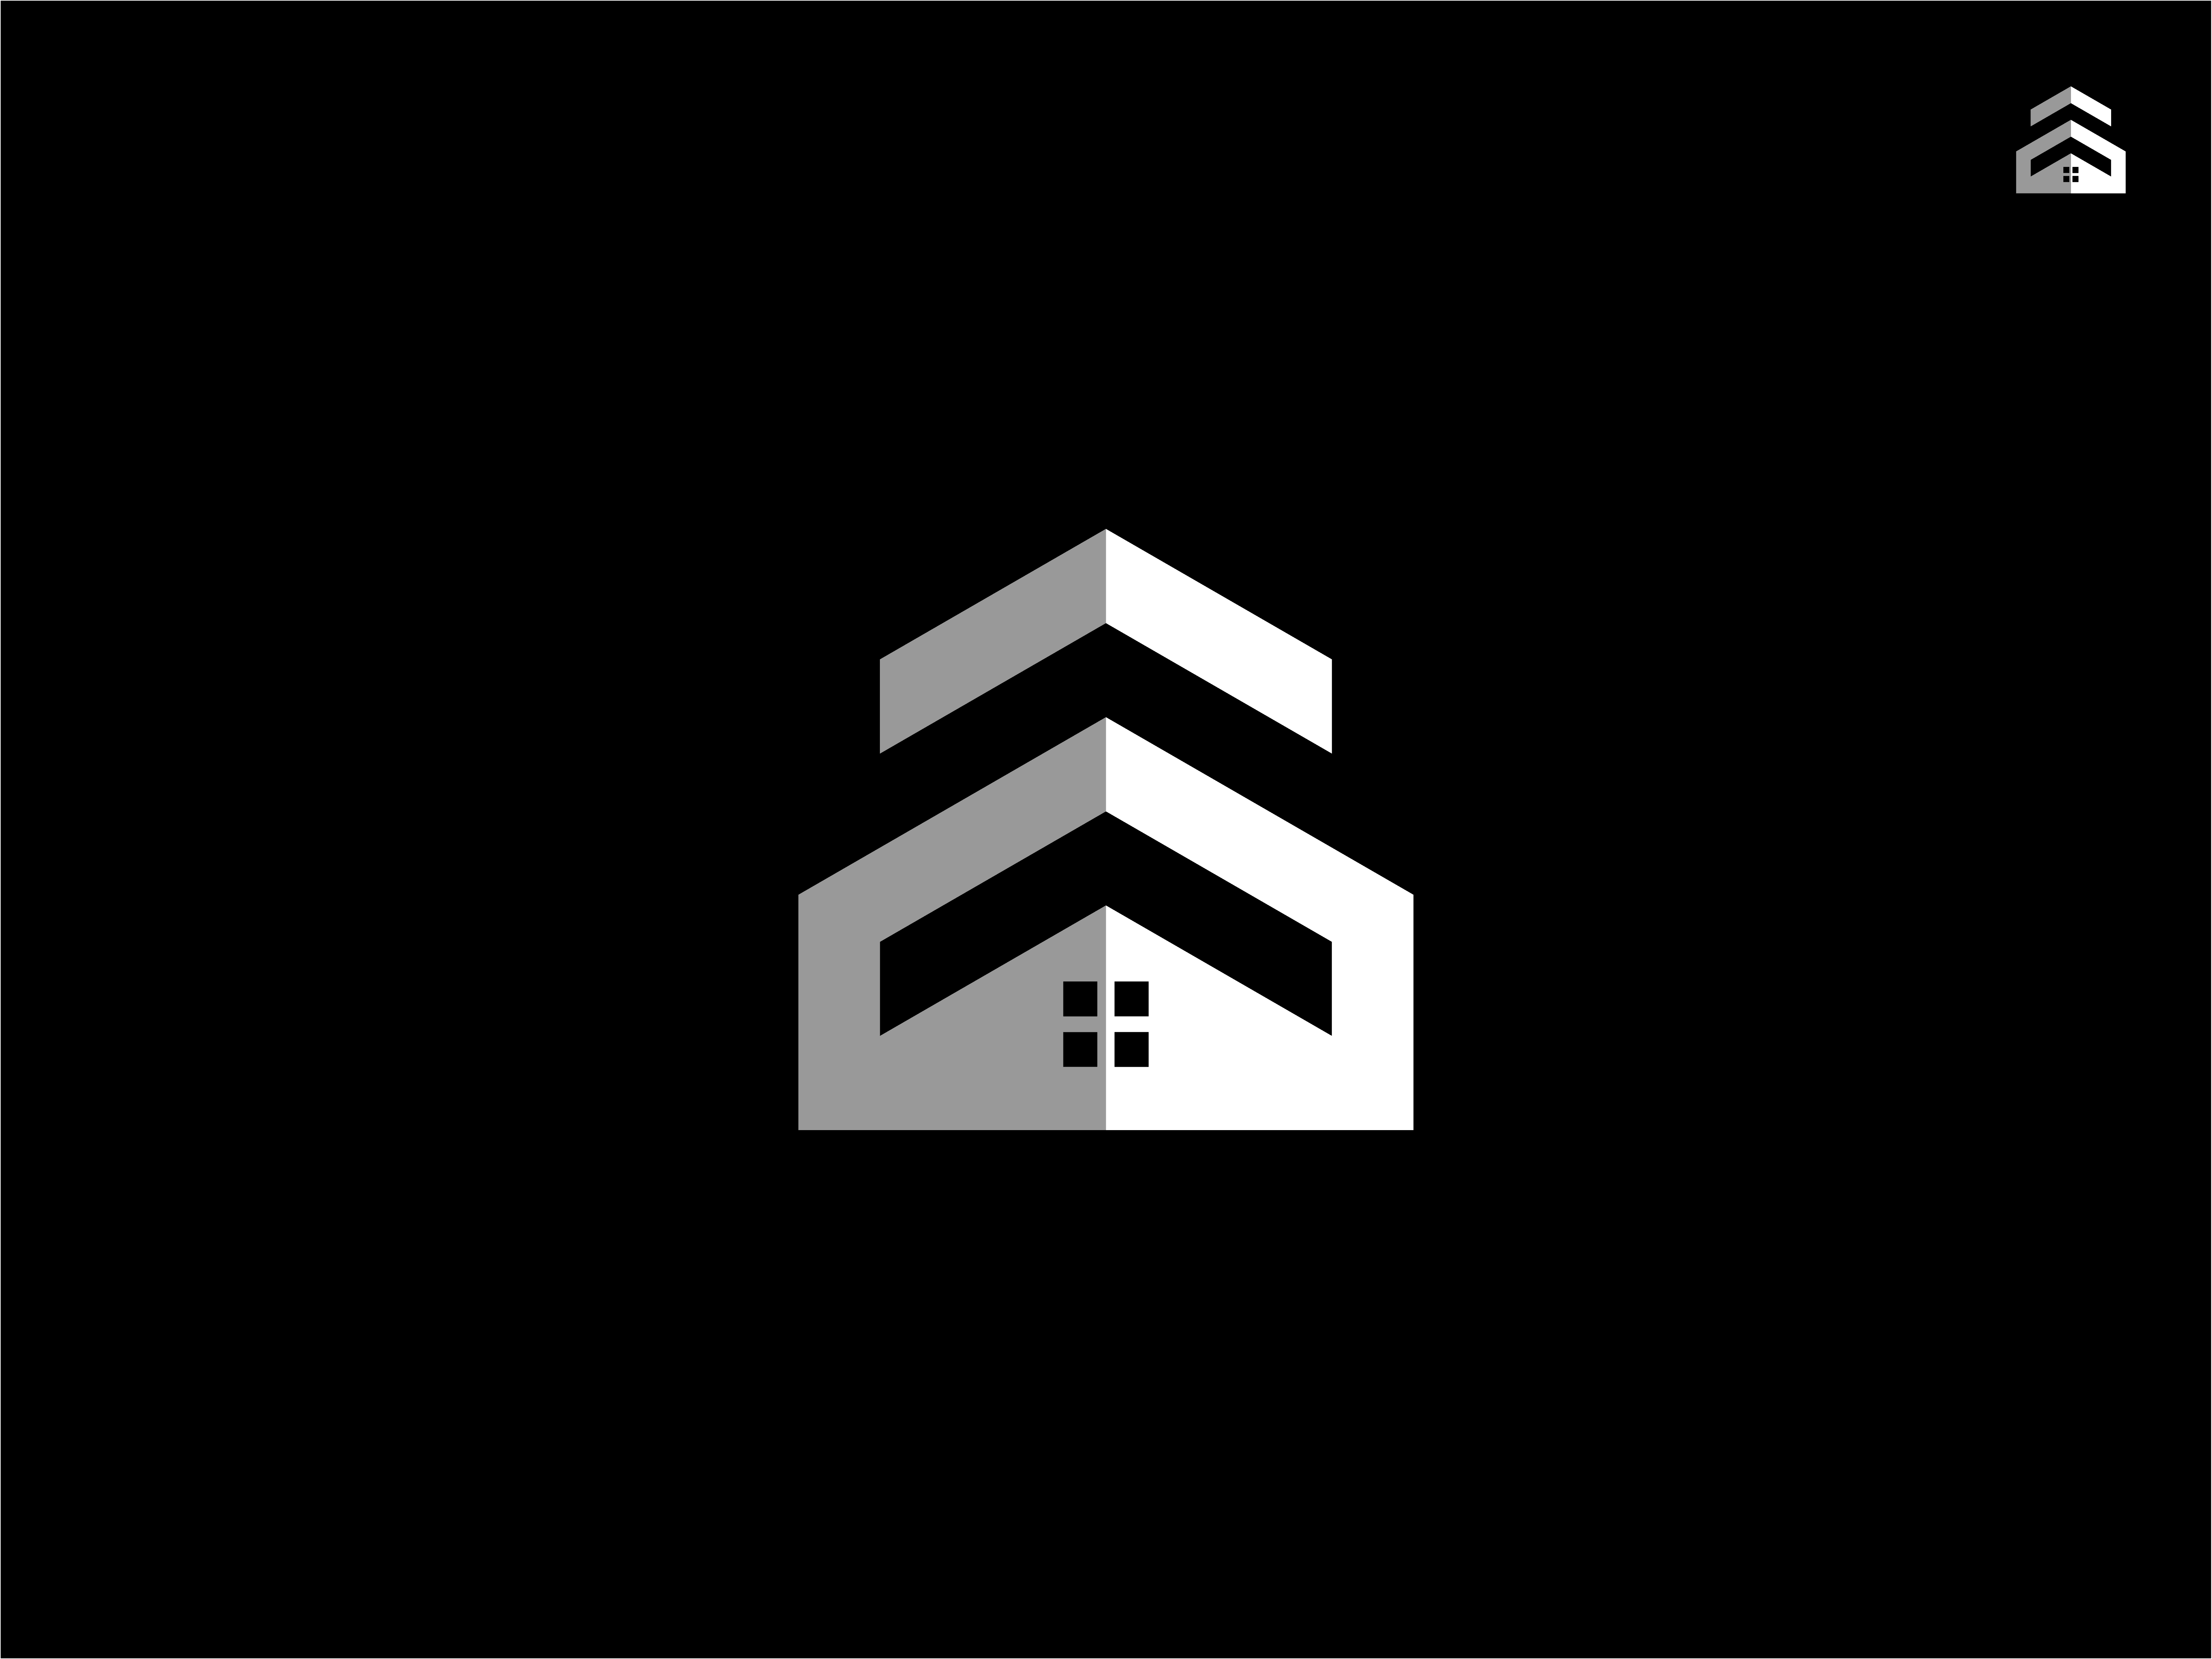 Elevate Estate_ Mark design, icon, Abstract arrow building construction cool creative design elevate home house logo mark minimal negativespace realestate up window